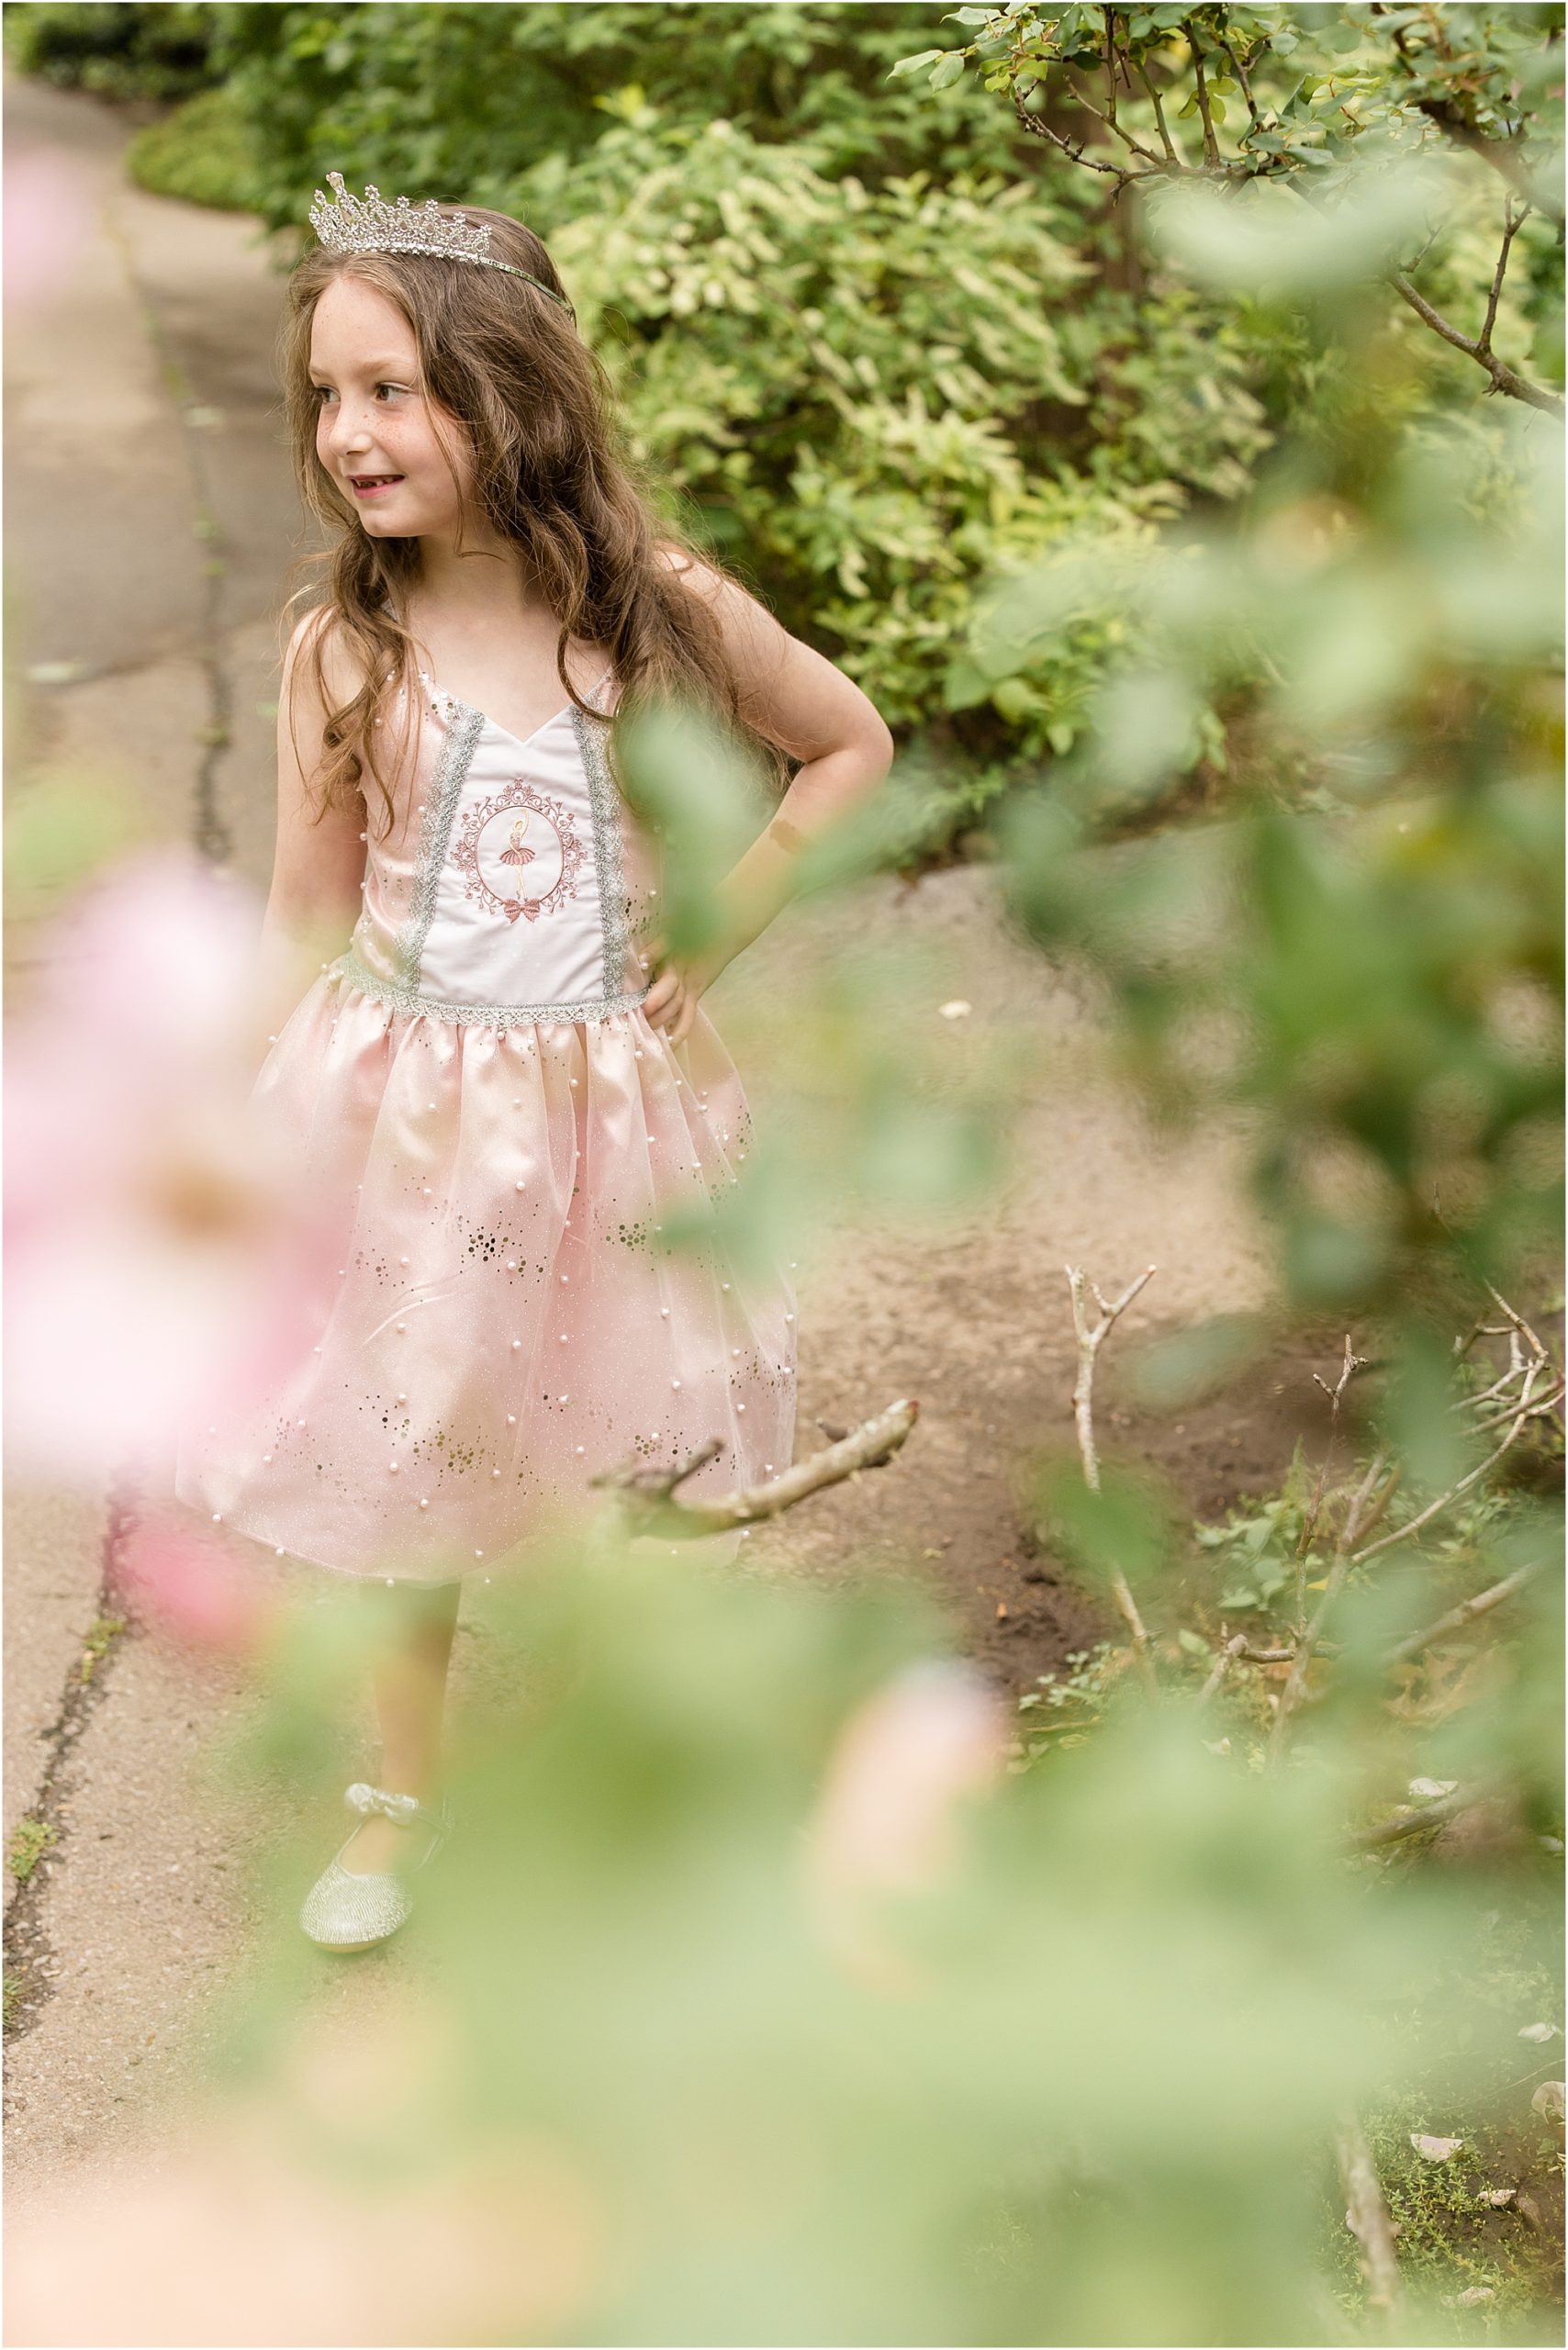 The little girl is standing surrounded by greenery. She is wearing a pink princess dress and a tiara. 